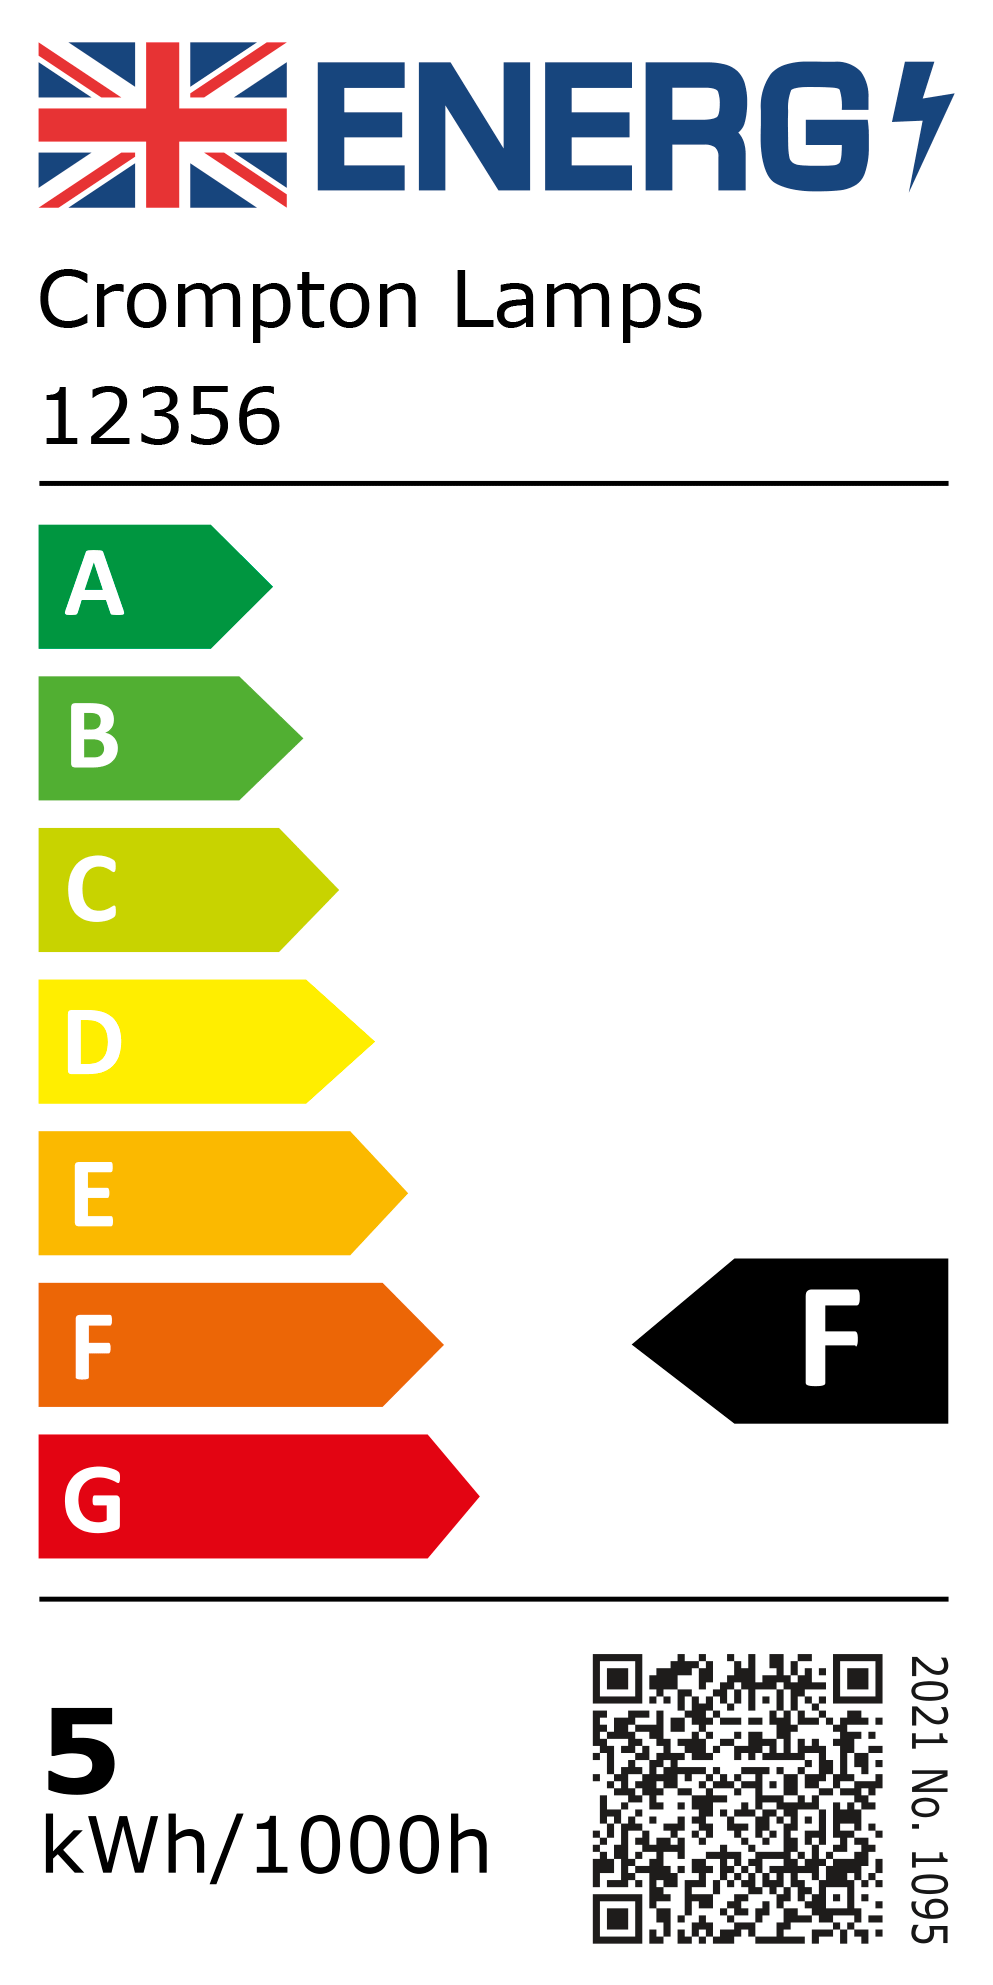 New 2021 Energy Rating Label: Stock Code 12356